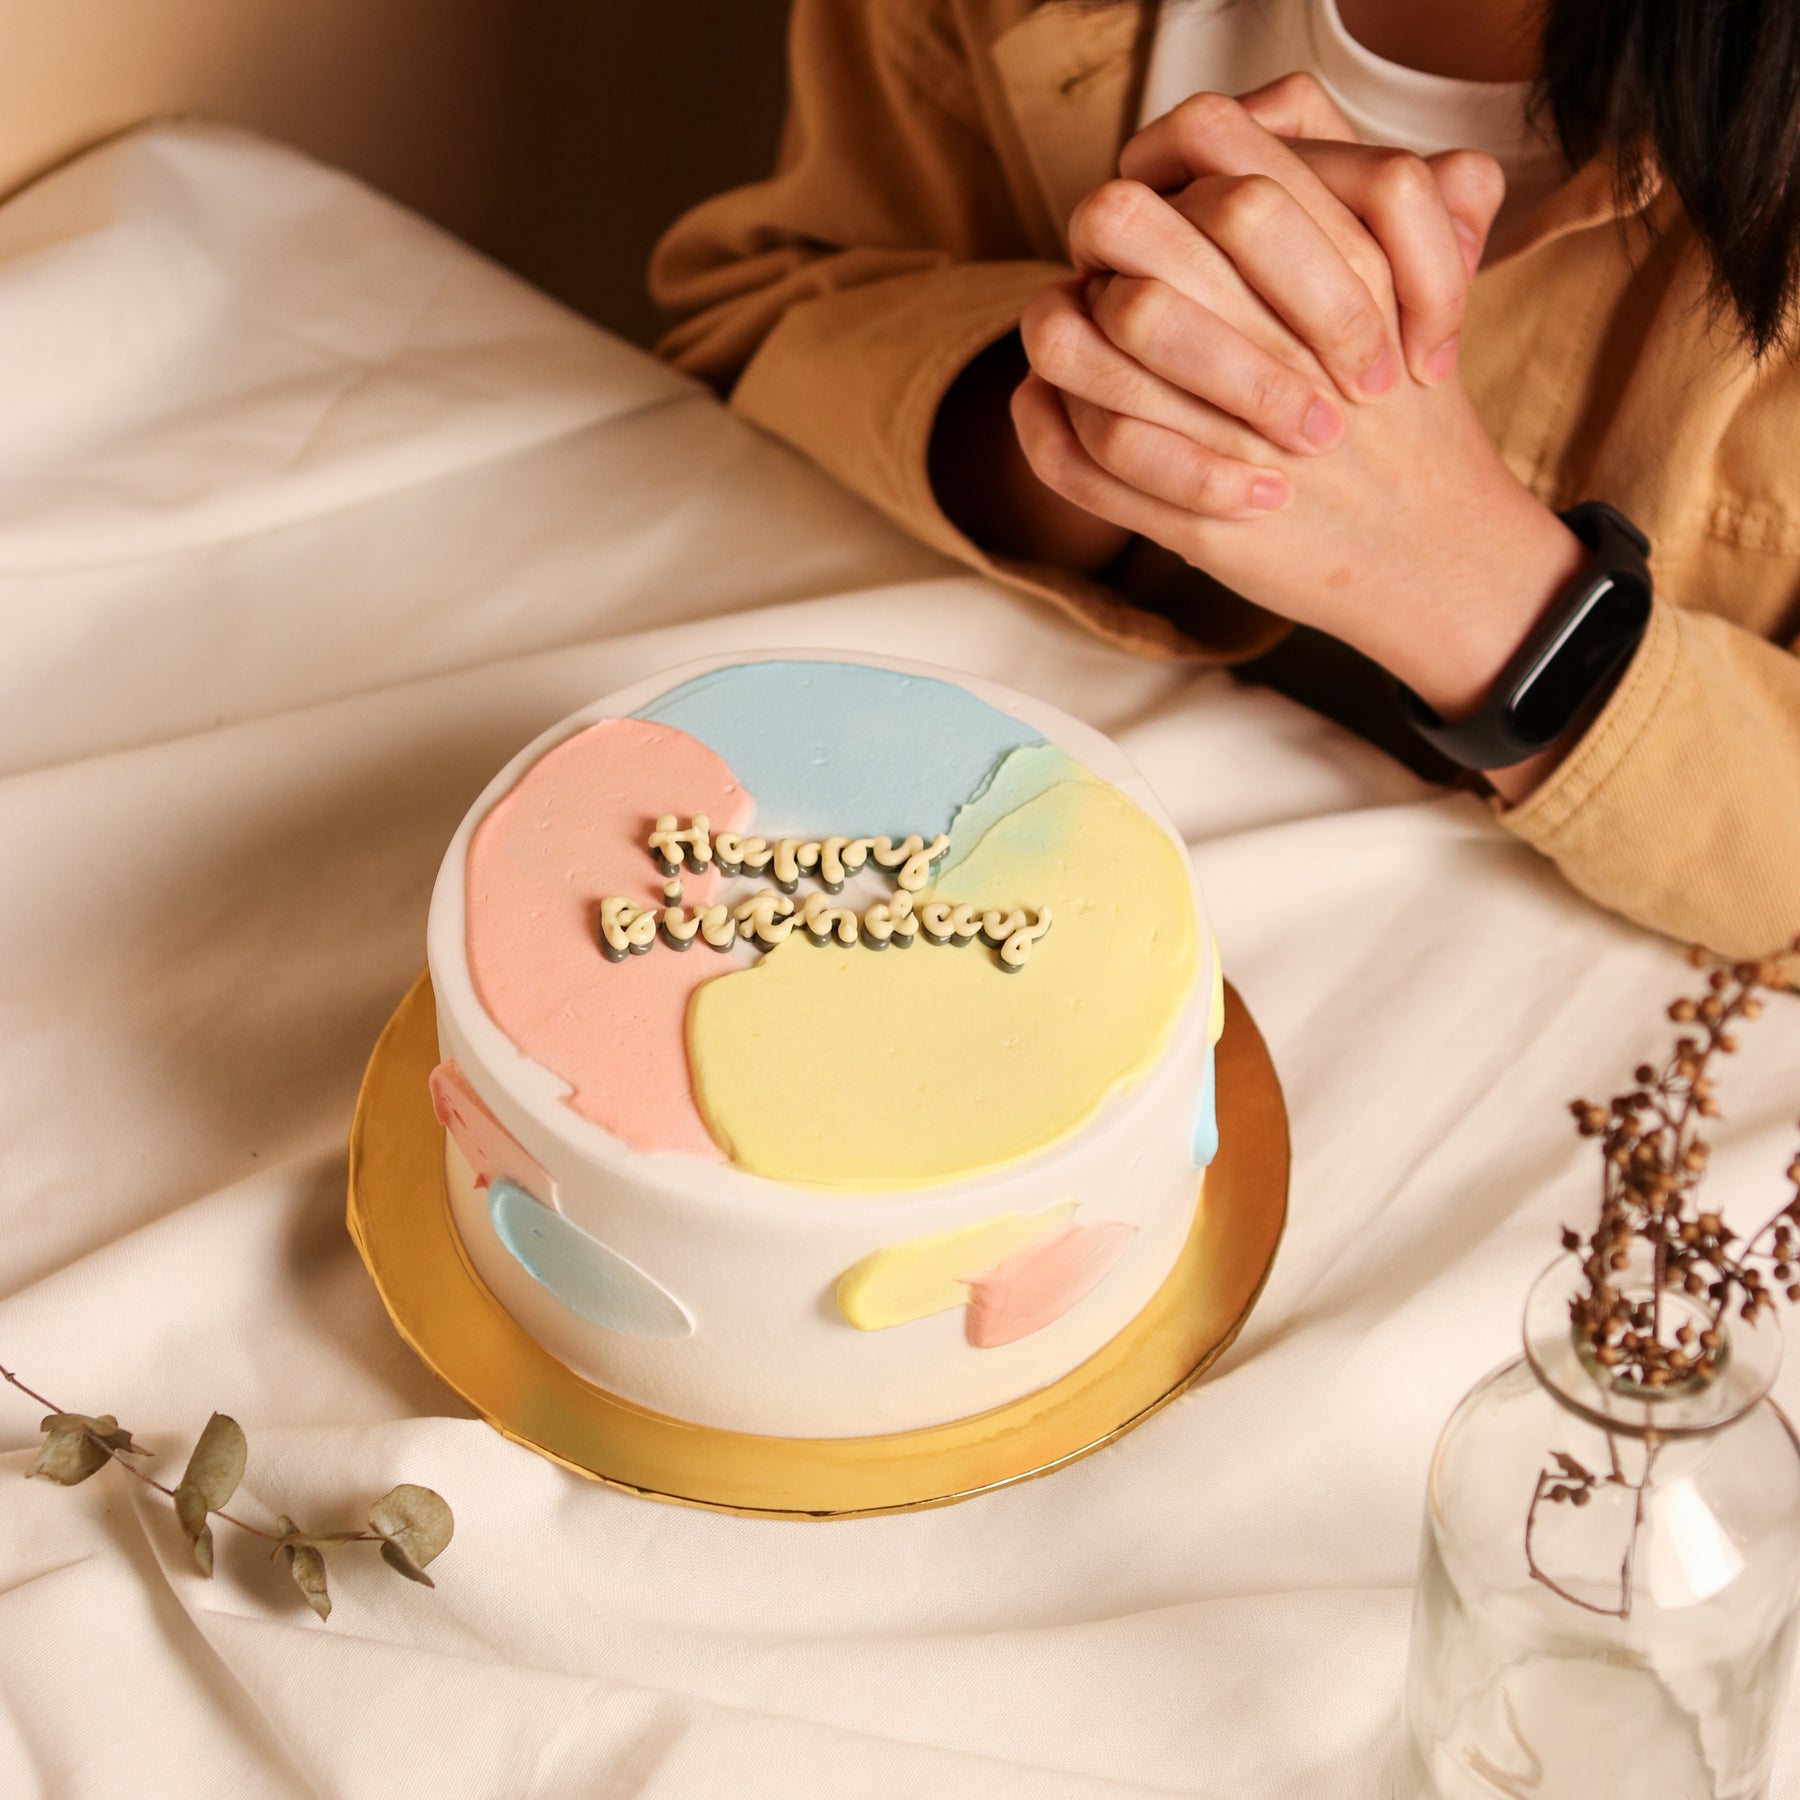 Petite Cakes for Small yet Meaningful Celebrations